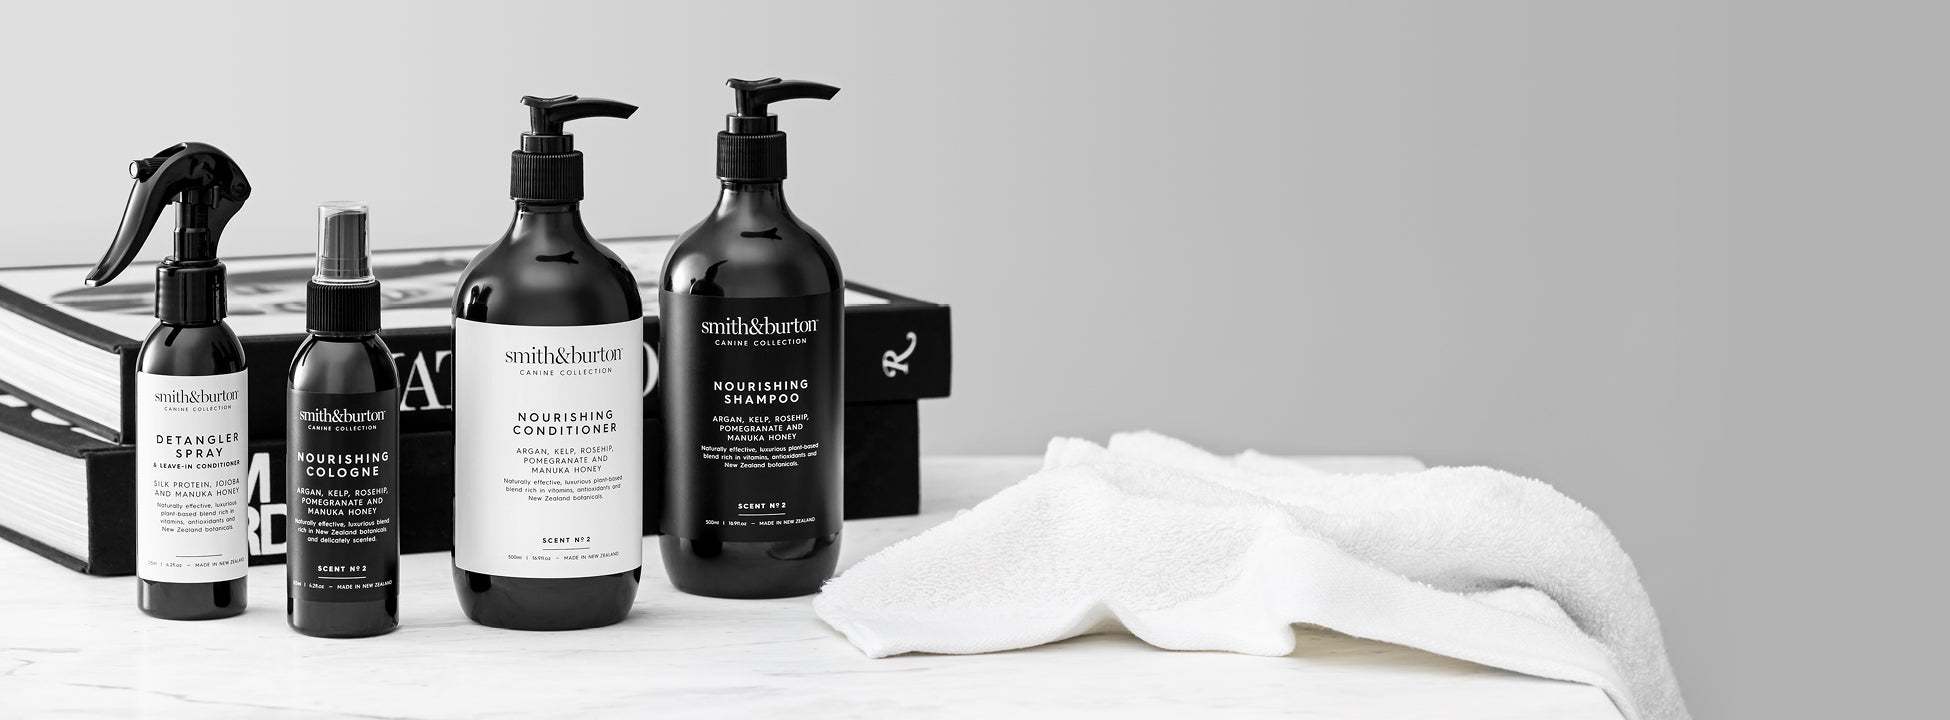 selection of nourishing dog grooming products